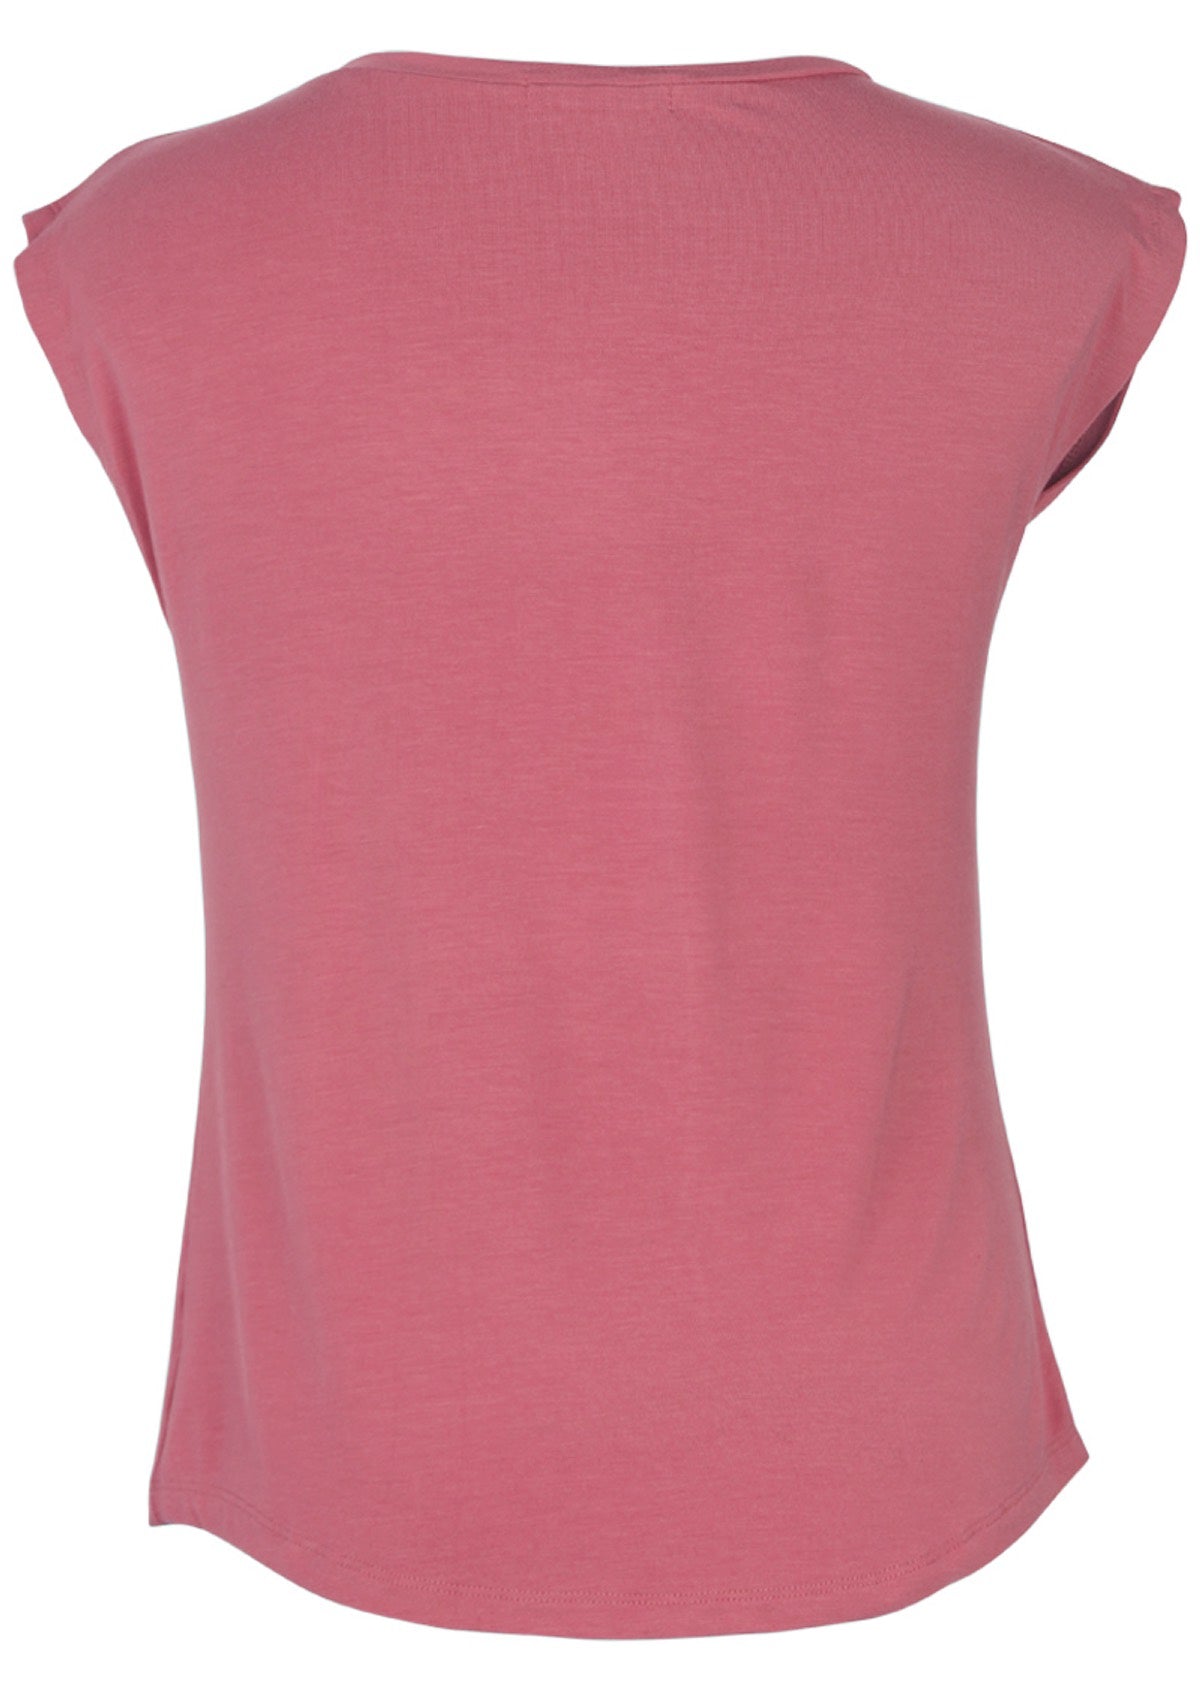 Back view of a women's pink v-neck short cap sleeve rayon top